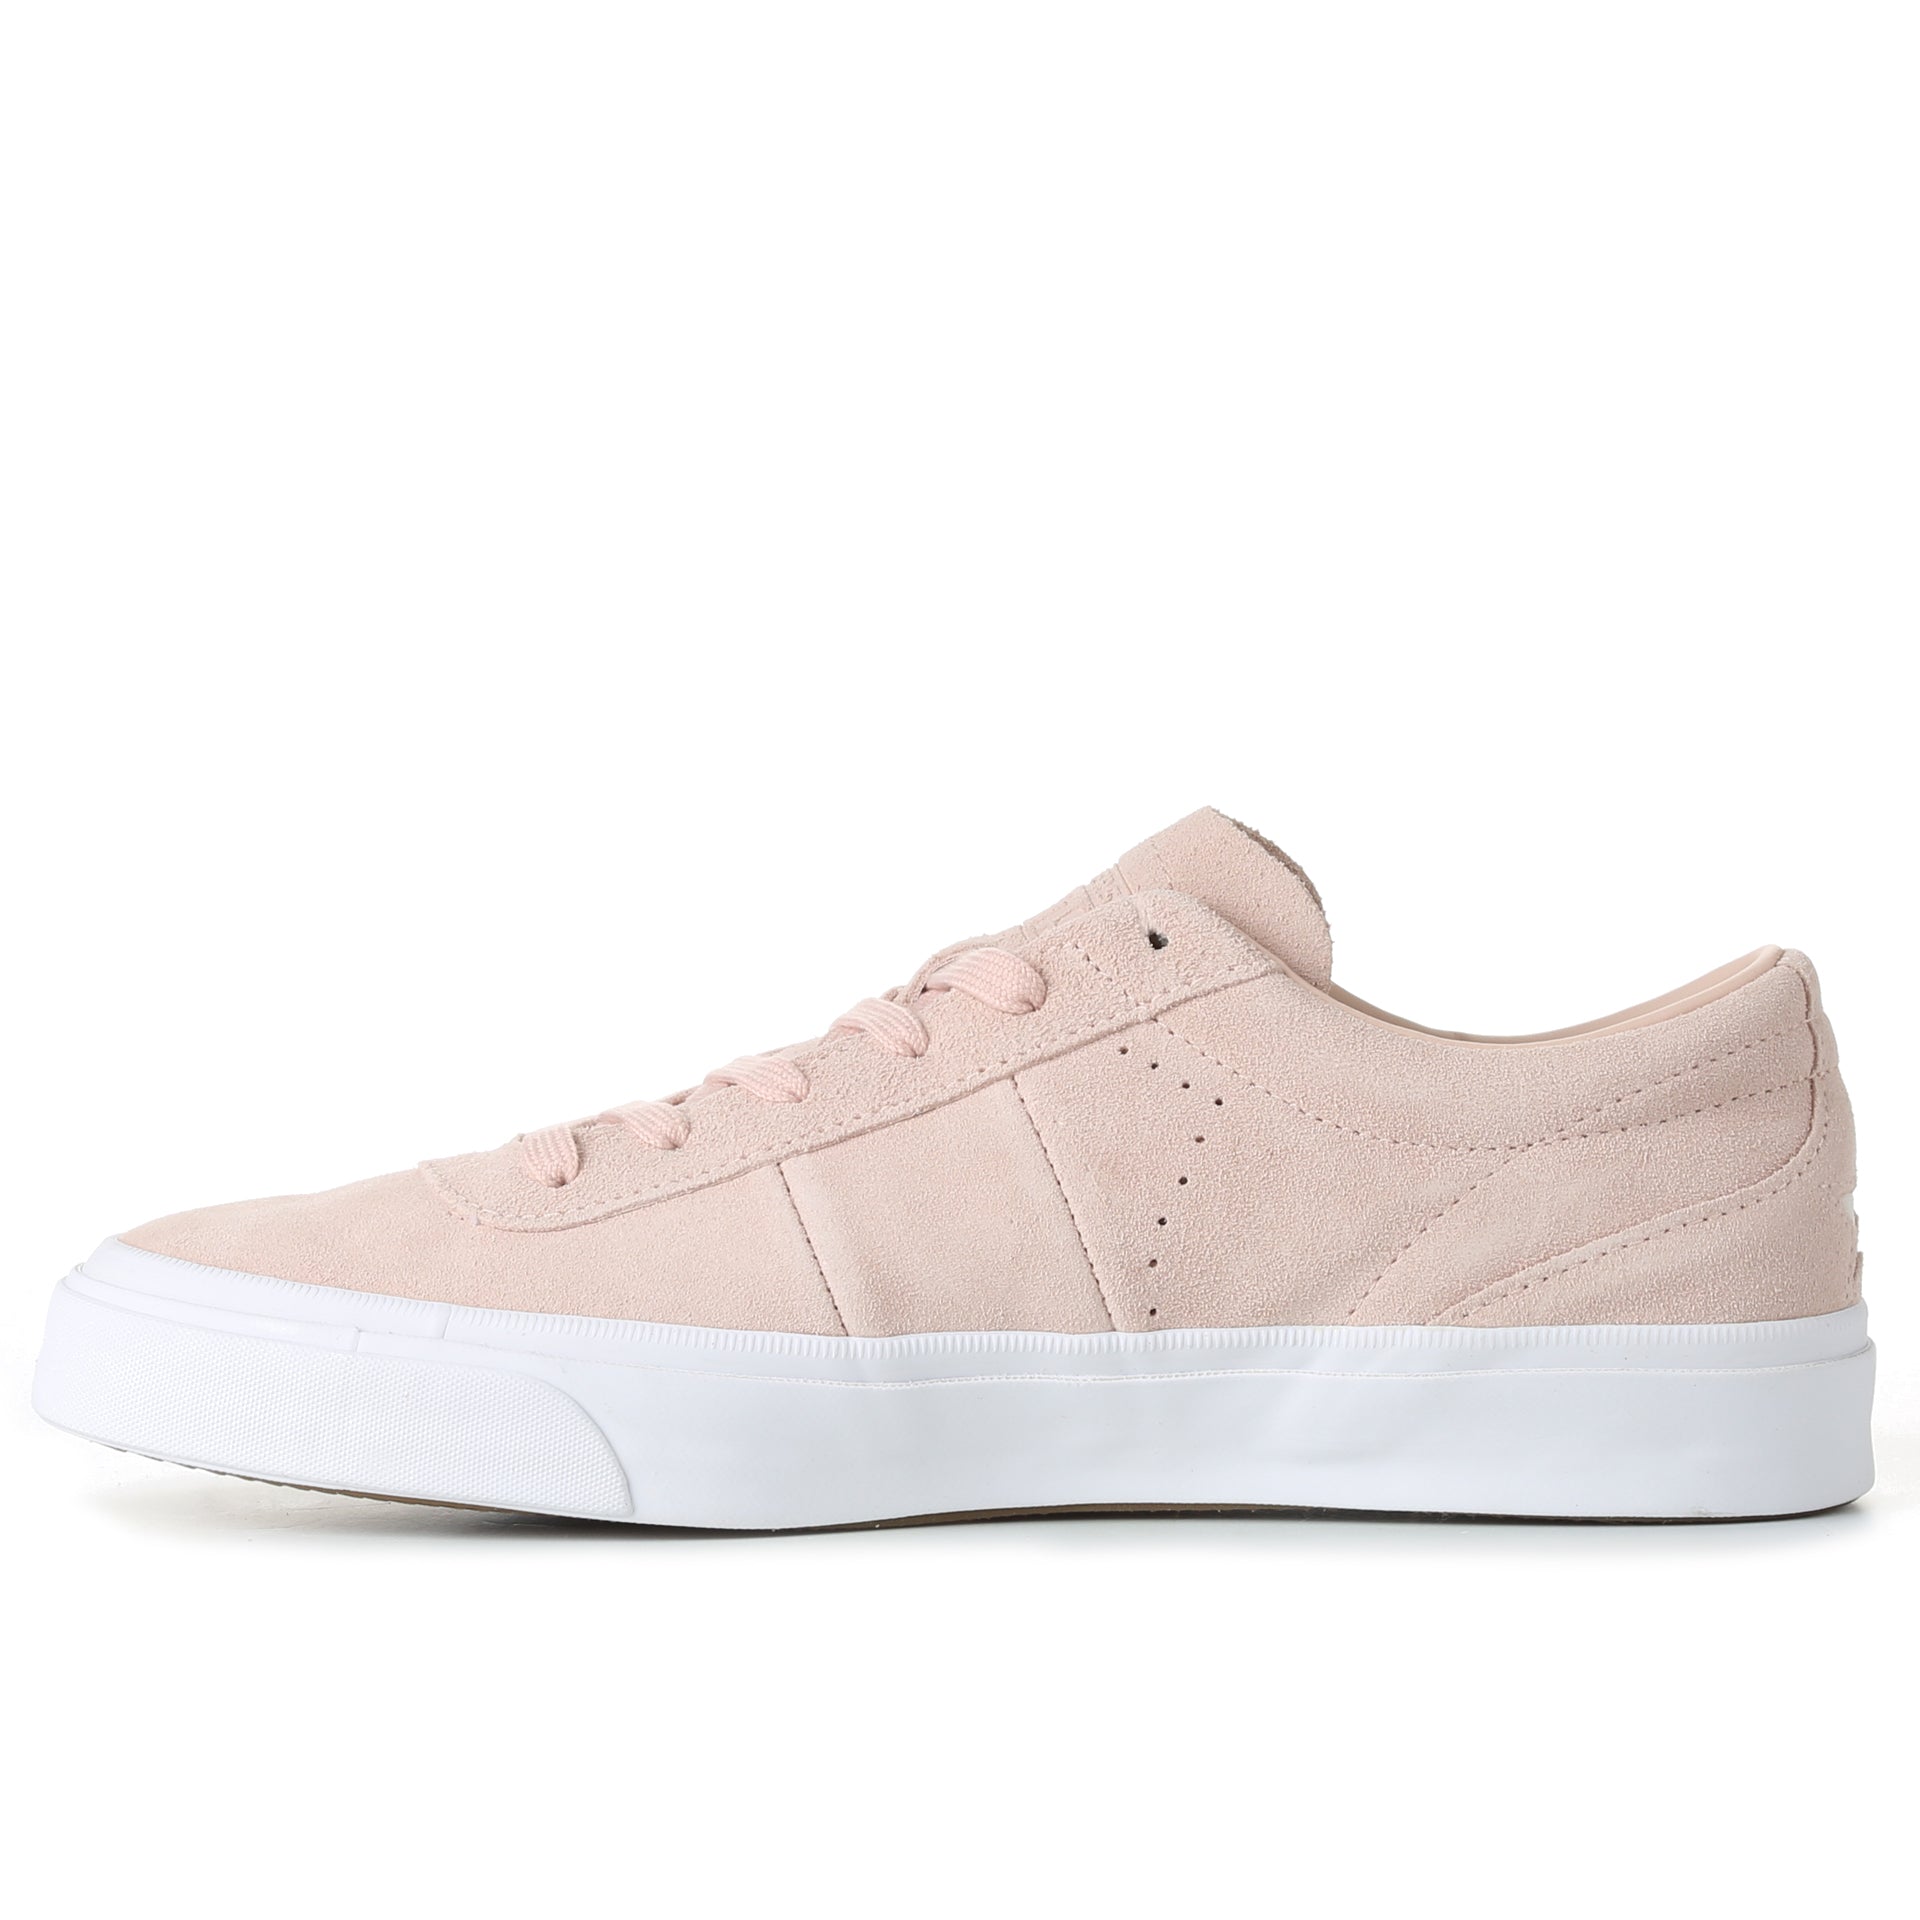 converse one star pro oiled suede low top